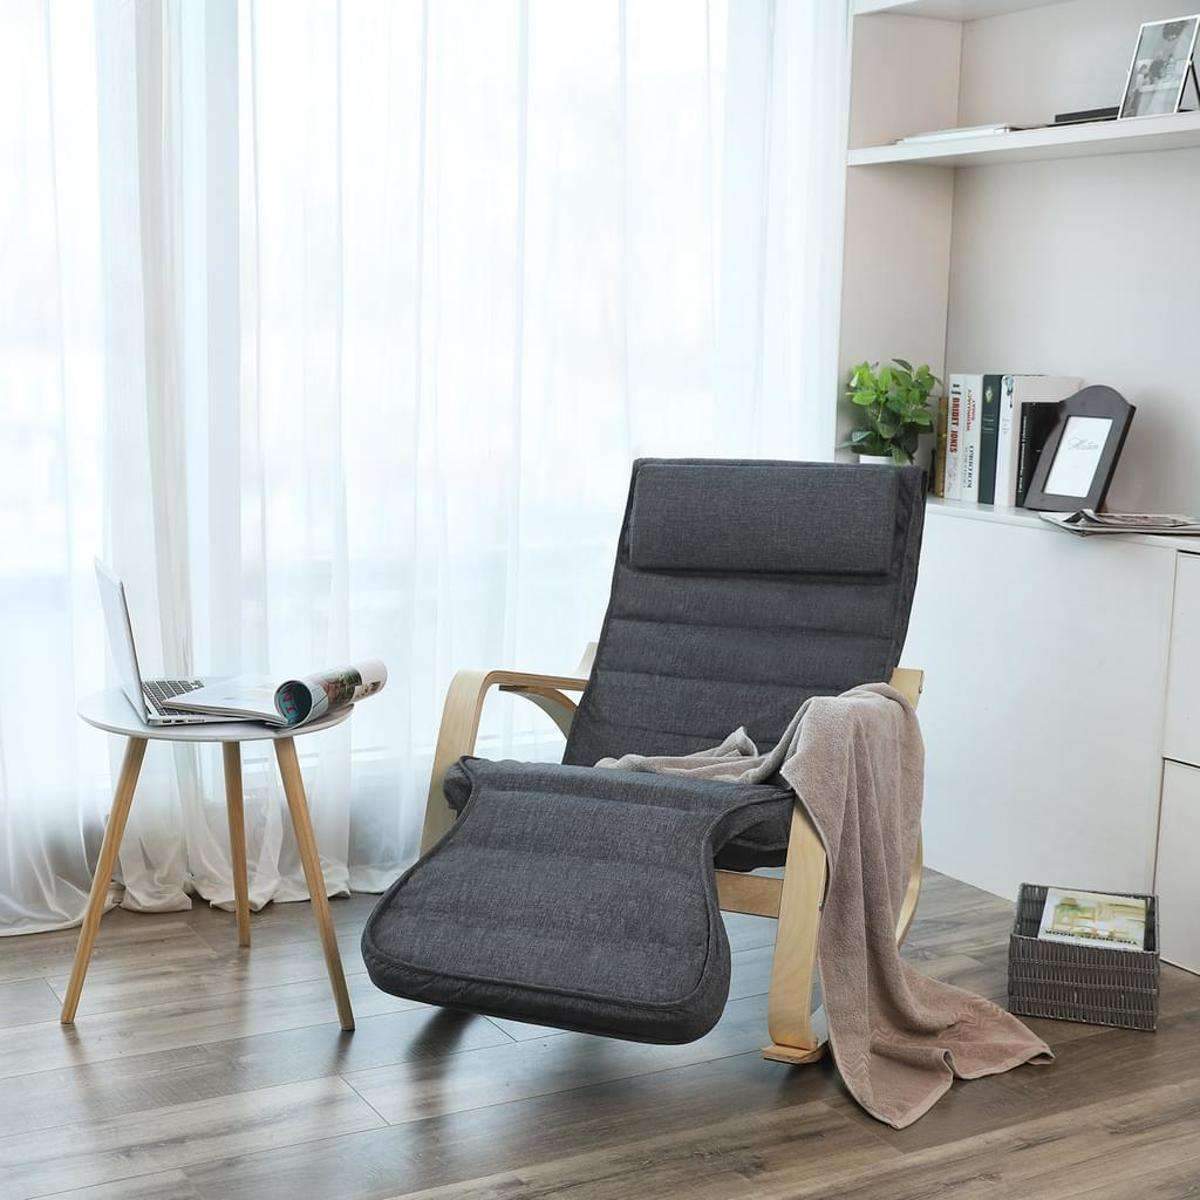 Nancy's Rocking Chair - Chaise relaxante - Chaise relax